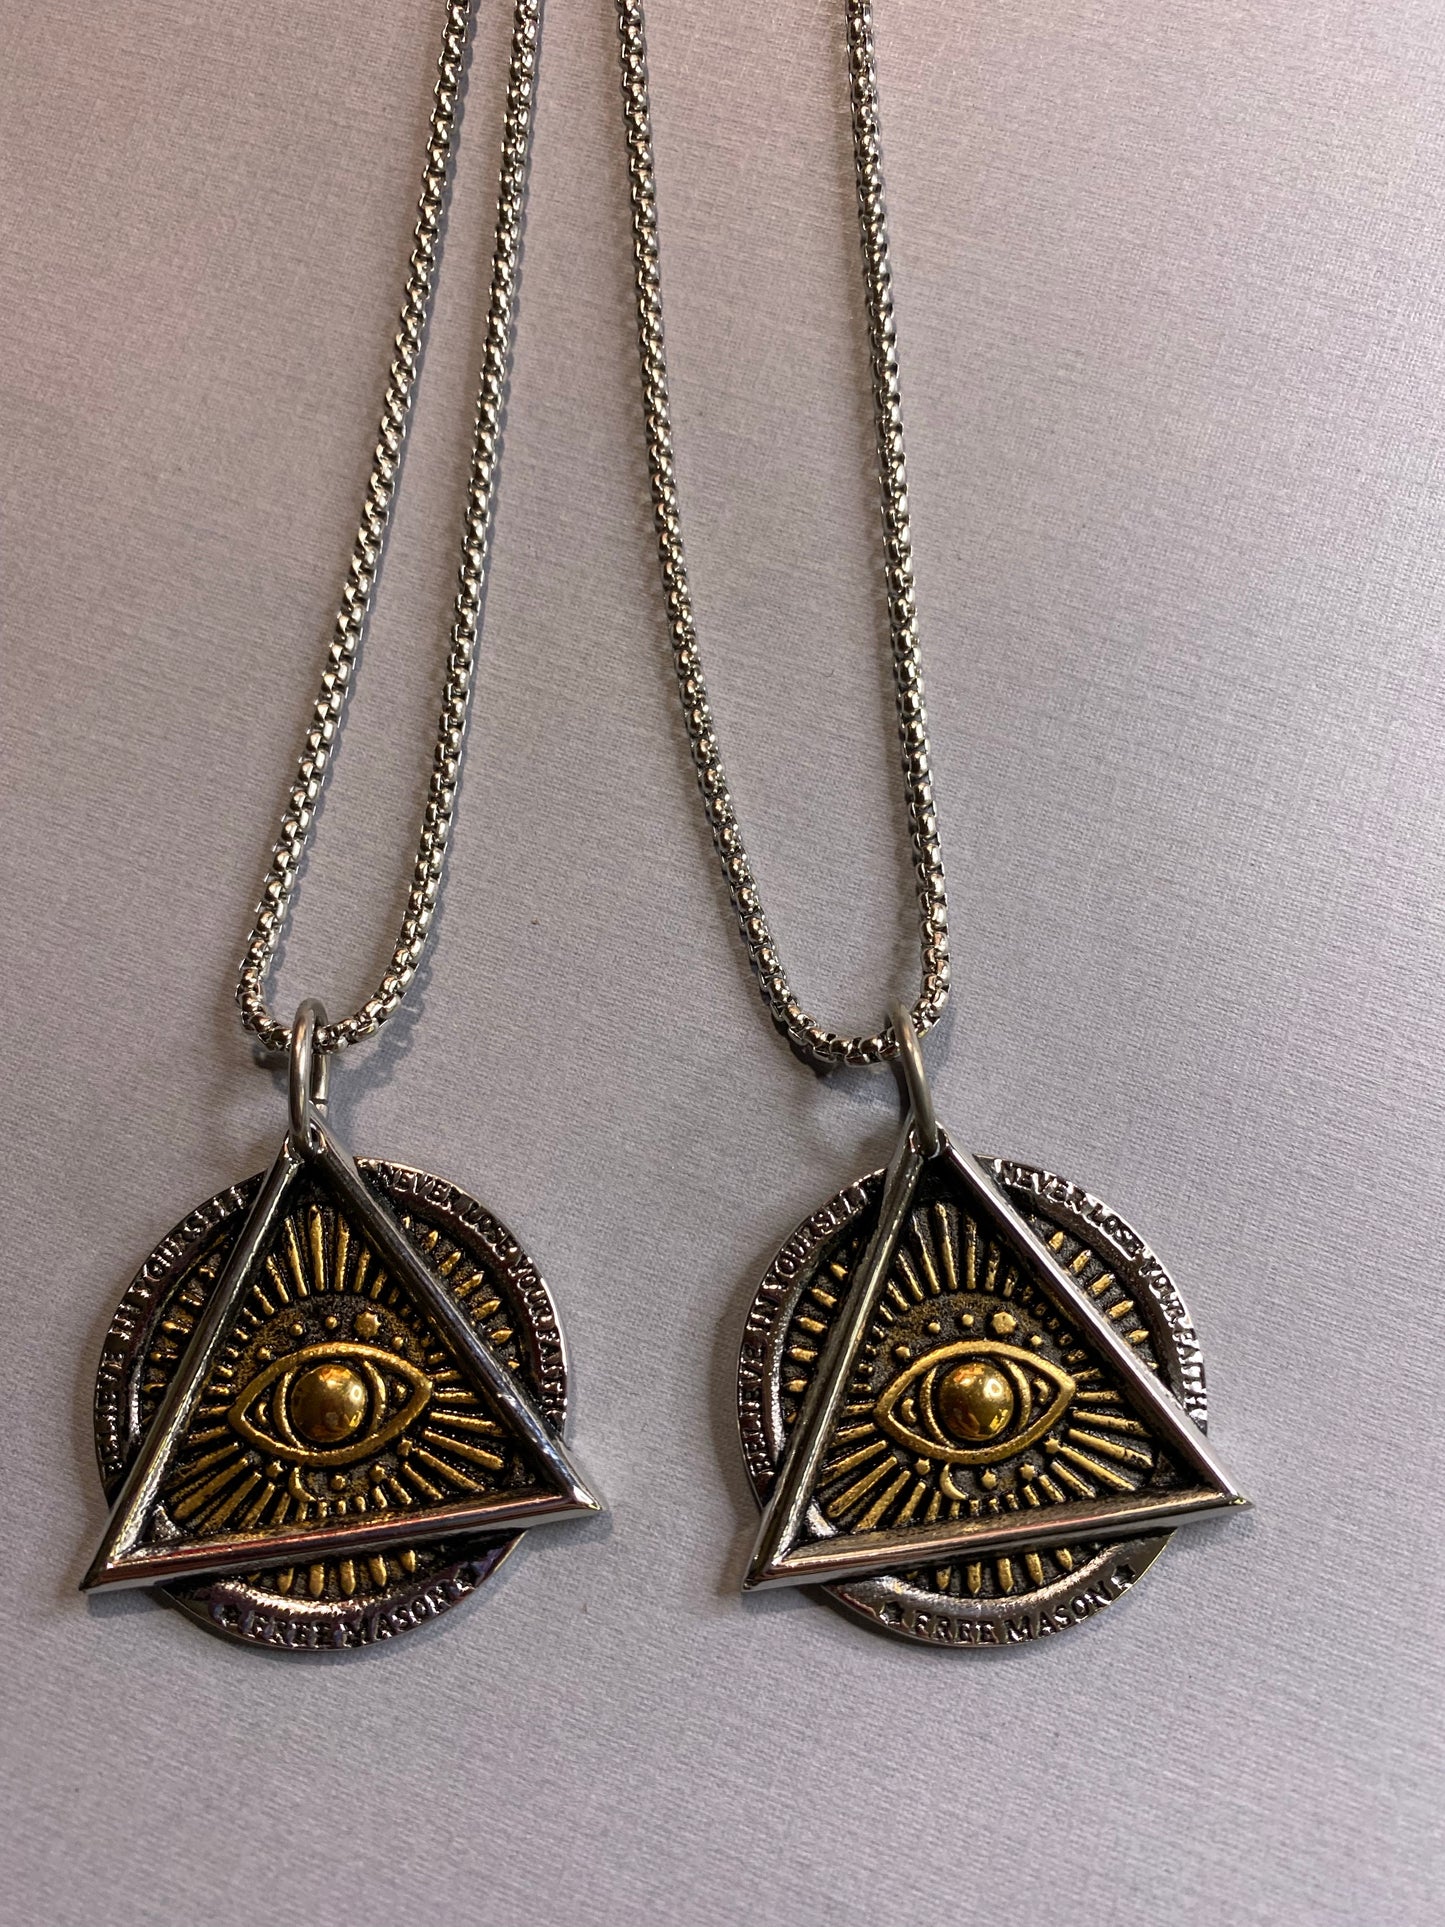 EGYPTIAN PYRAMID WITH EYE NECKLACE JEWELRY